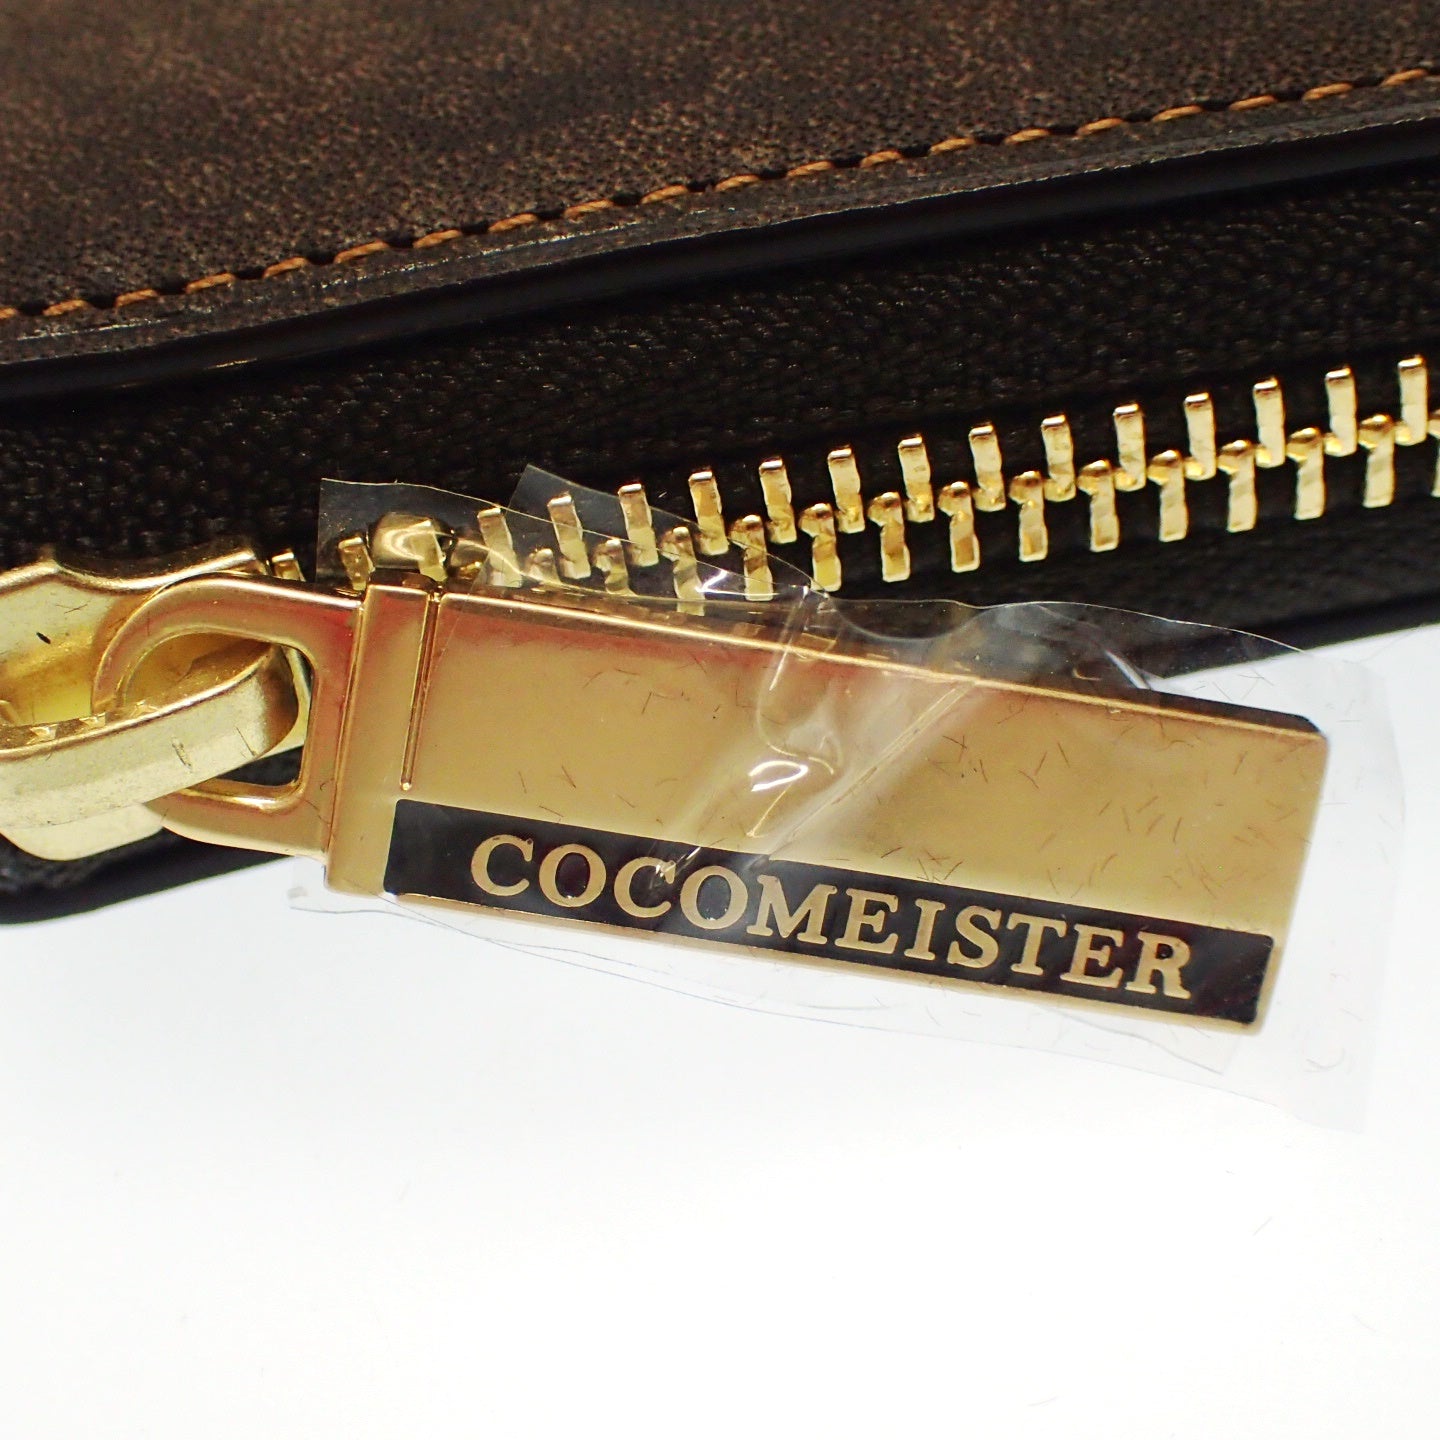 COCOMEISTER long wallet Beyer wallet round zip Betelgeuse series leather with box COCOMEISTER [AFI18] [Used] 